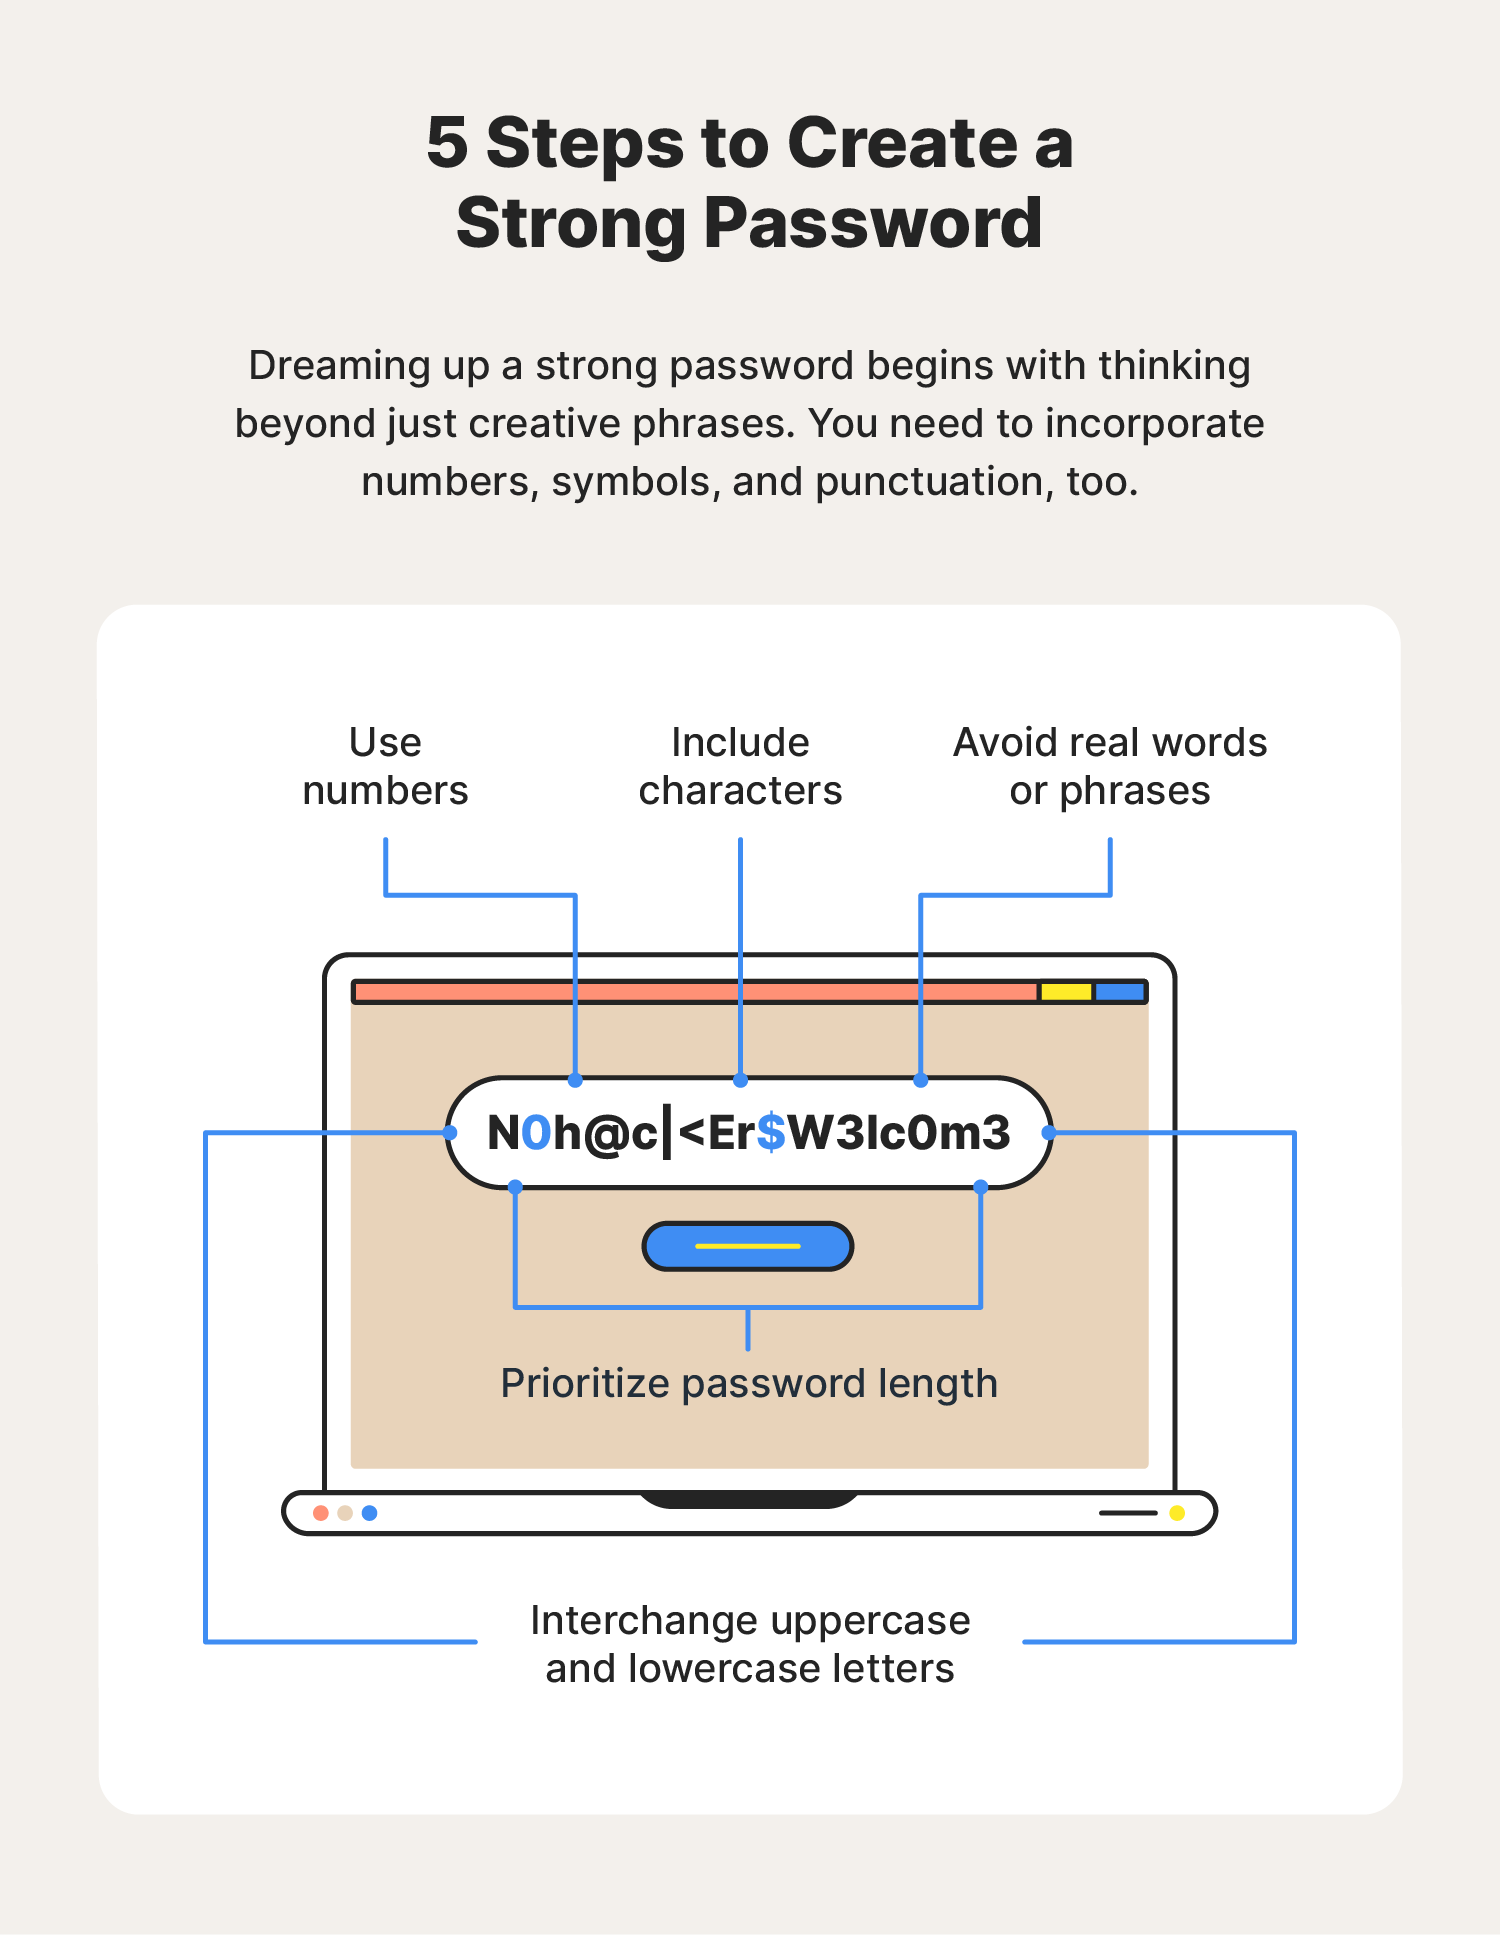 Change the passwords for any accounts that may have been compromised by the virus.
Use strong passwords that include a combination of letters, numbers, and symbols.